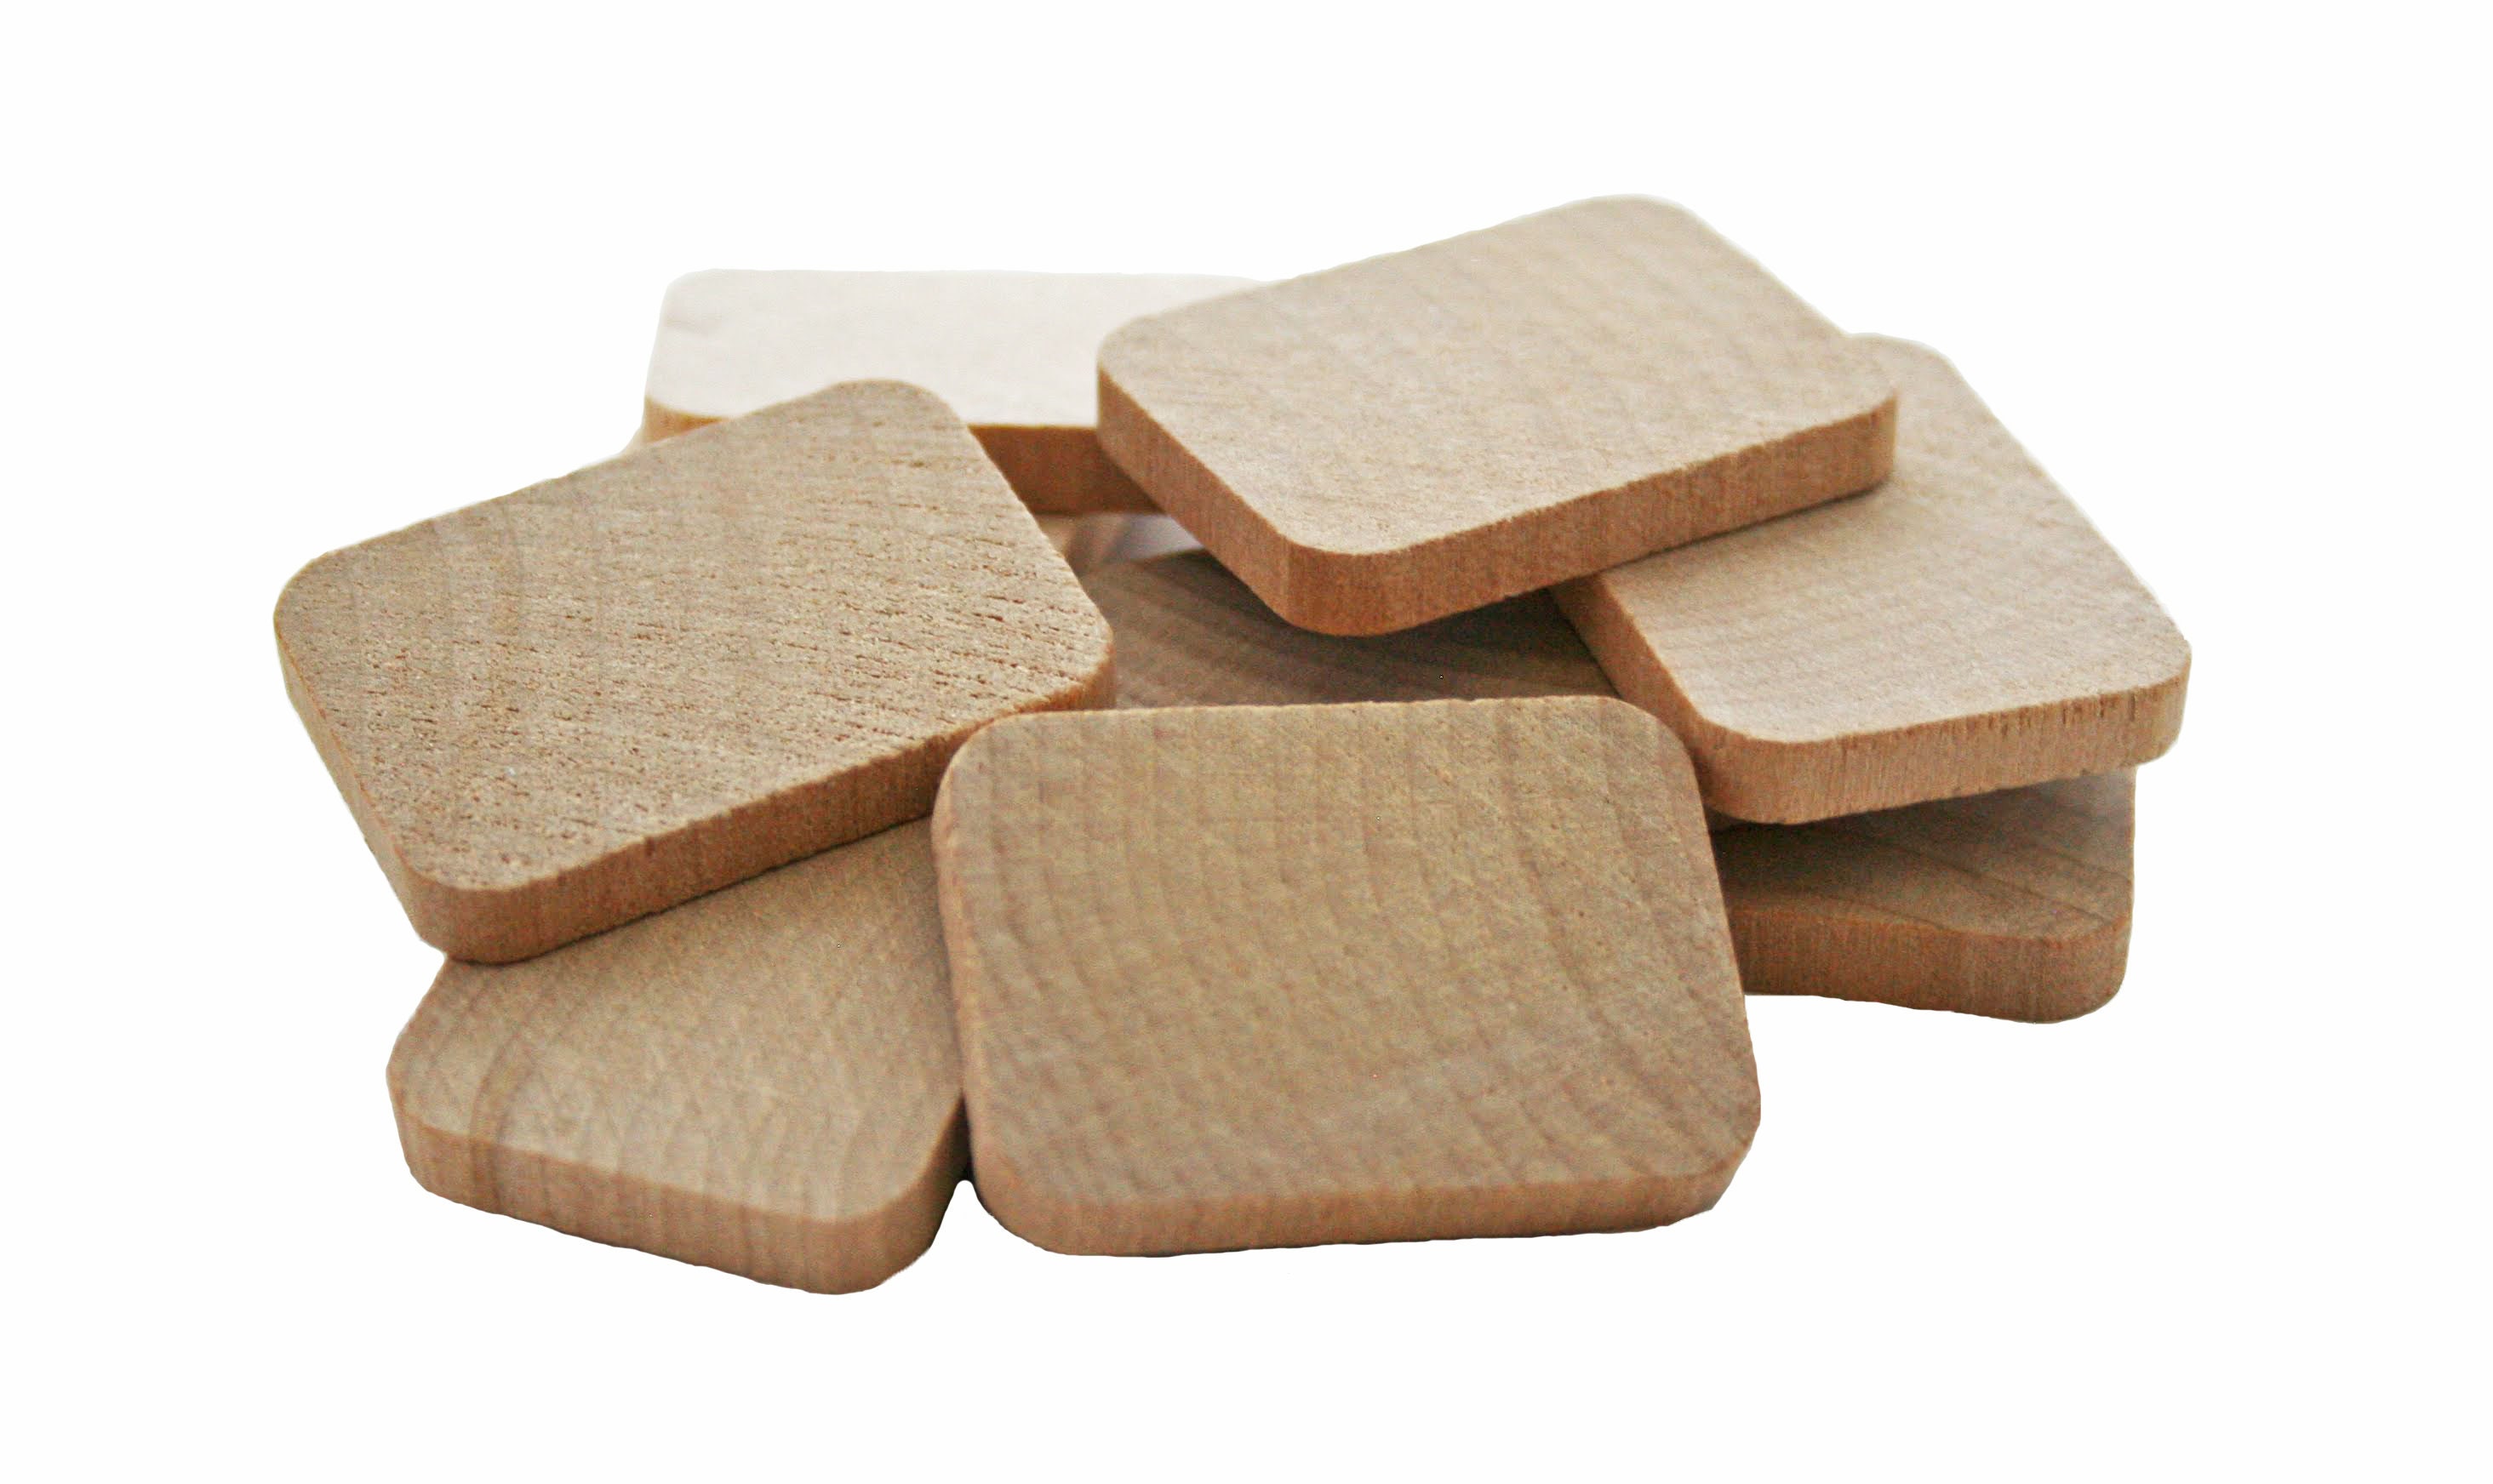 Wood Squares Tiles Unfinished for Crafting, Wooden Craft Squares, DIY Craft  Supplies Wood Square Shape, Wood Base Game Pieces Small Blocks 